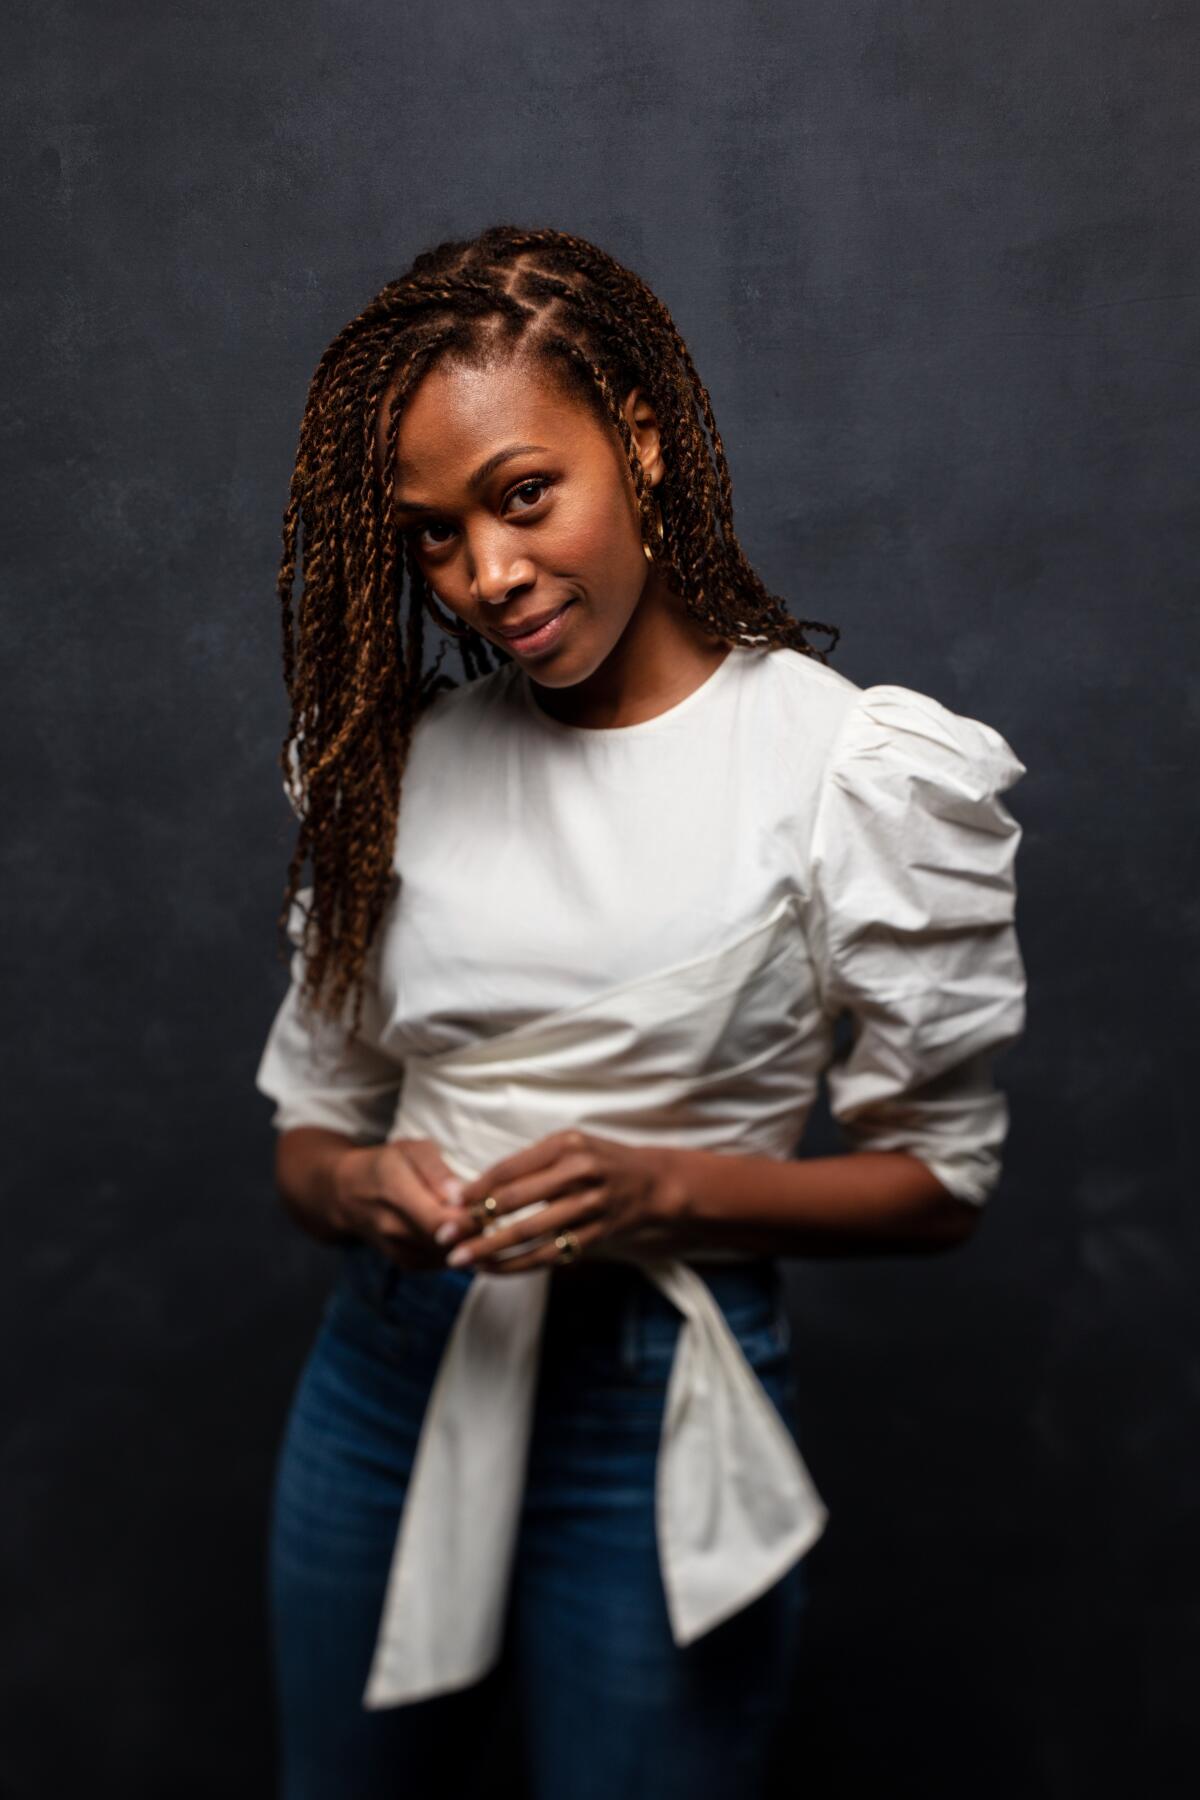 Nicole Beharie, from the film “Miss Juneteenth,” in the L.A. Times Studio at this year's Sundance Film Festival 